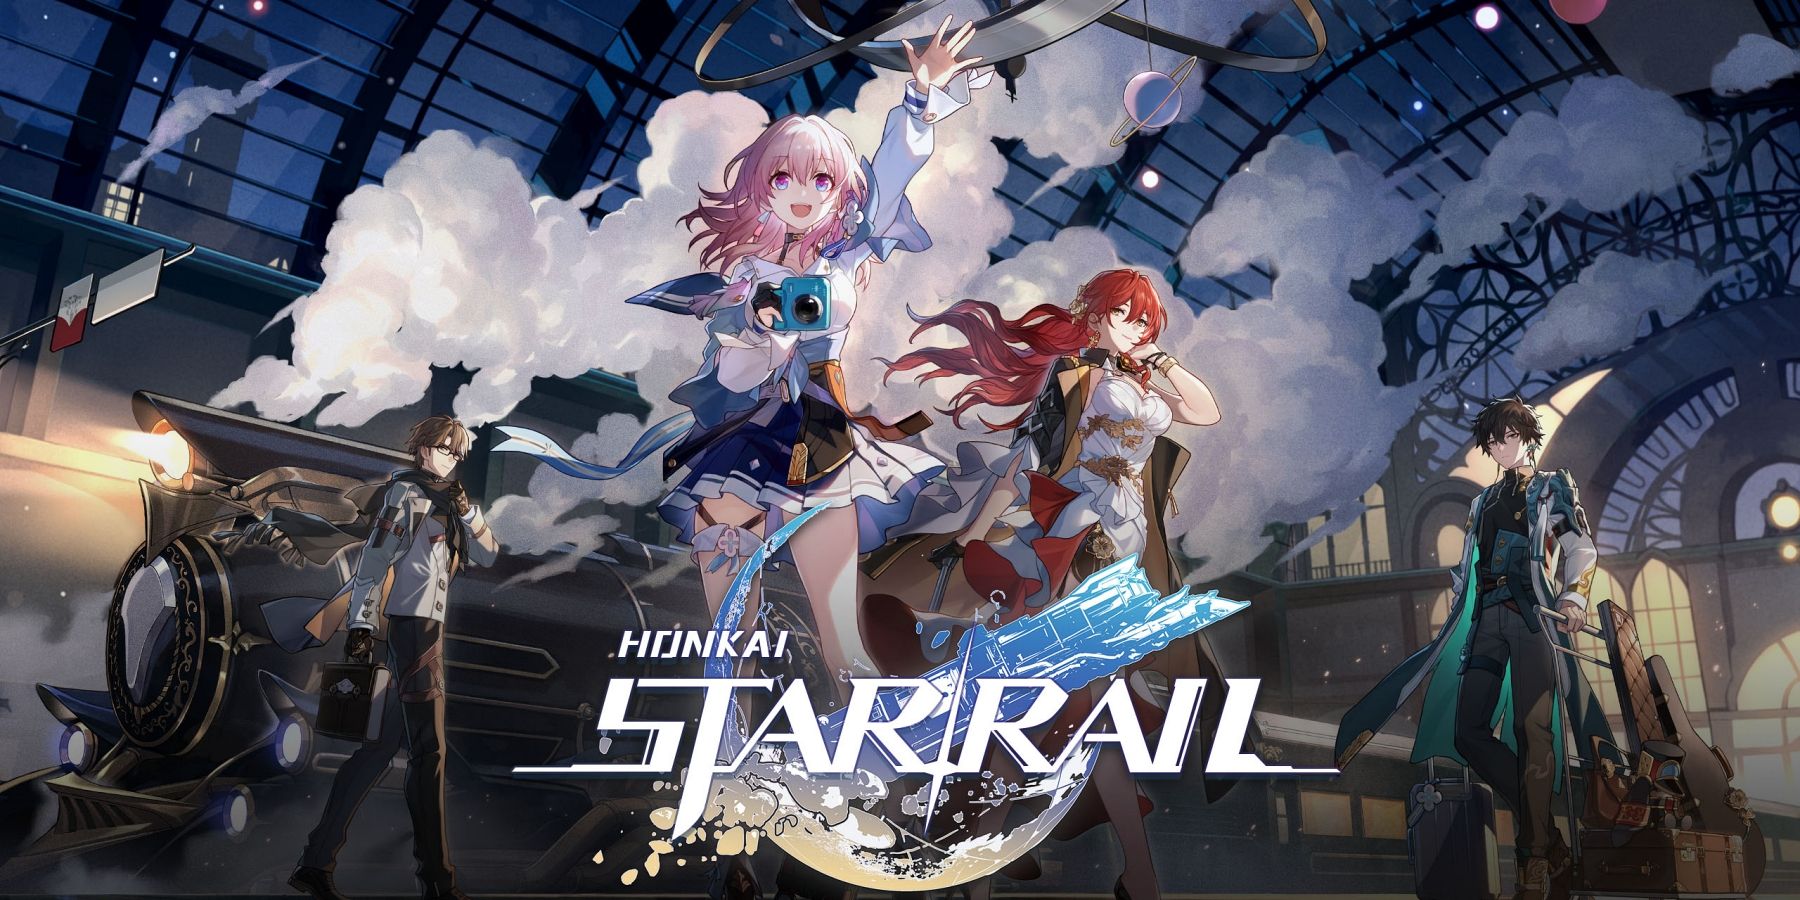 honkai-star-rail-leak-reveals-ascension-and-trace-materials-for-upcoming-characters